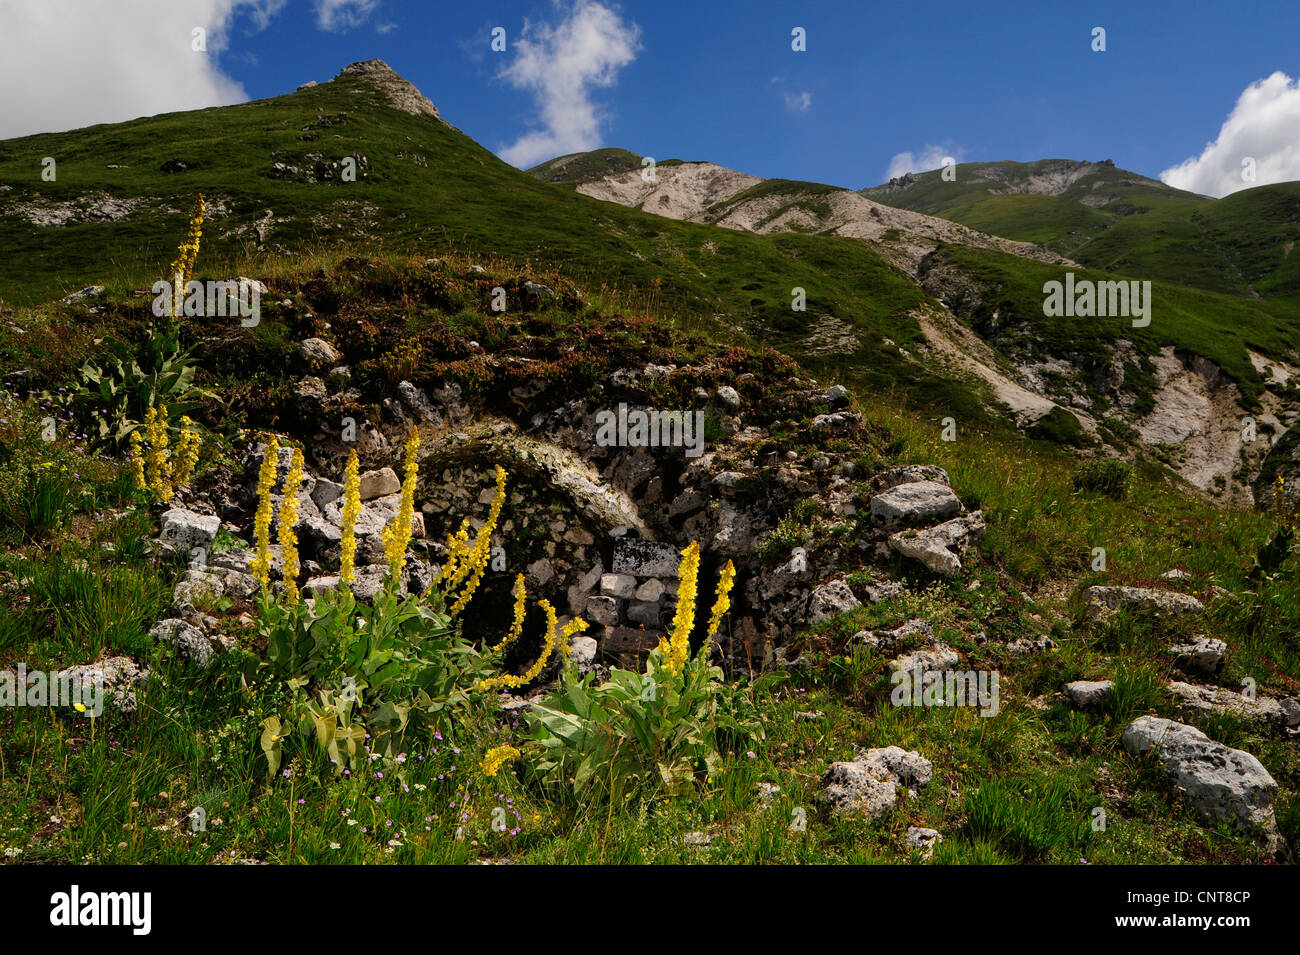 mountain tops with dry meadows and boulders, in the foreground a cisterne surrounded by mulleins, Italy, Nationalpark Abruzzen Stock Photo